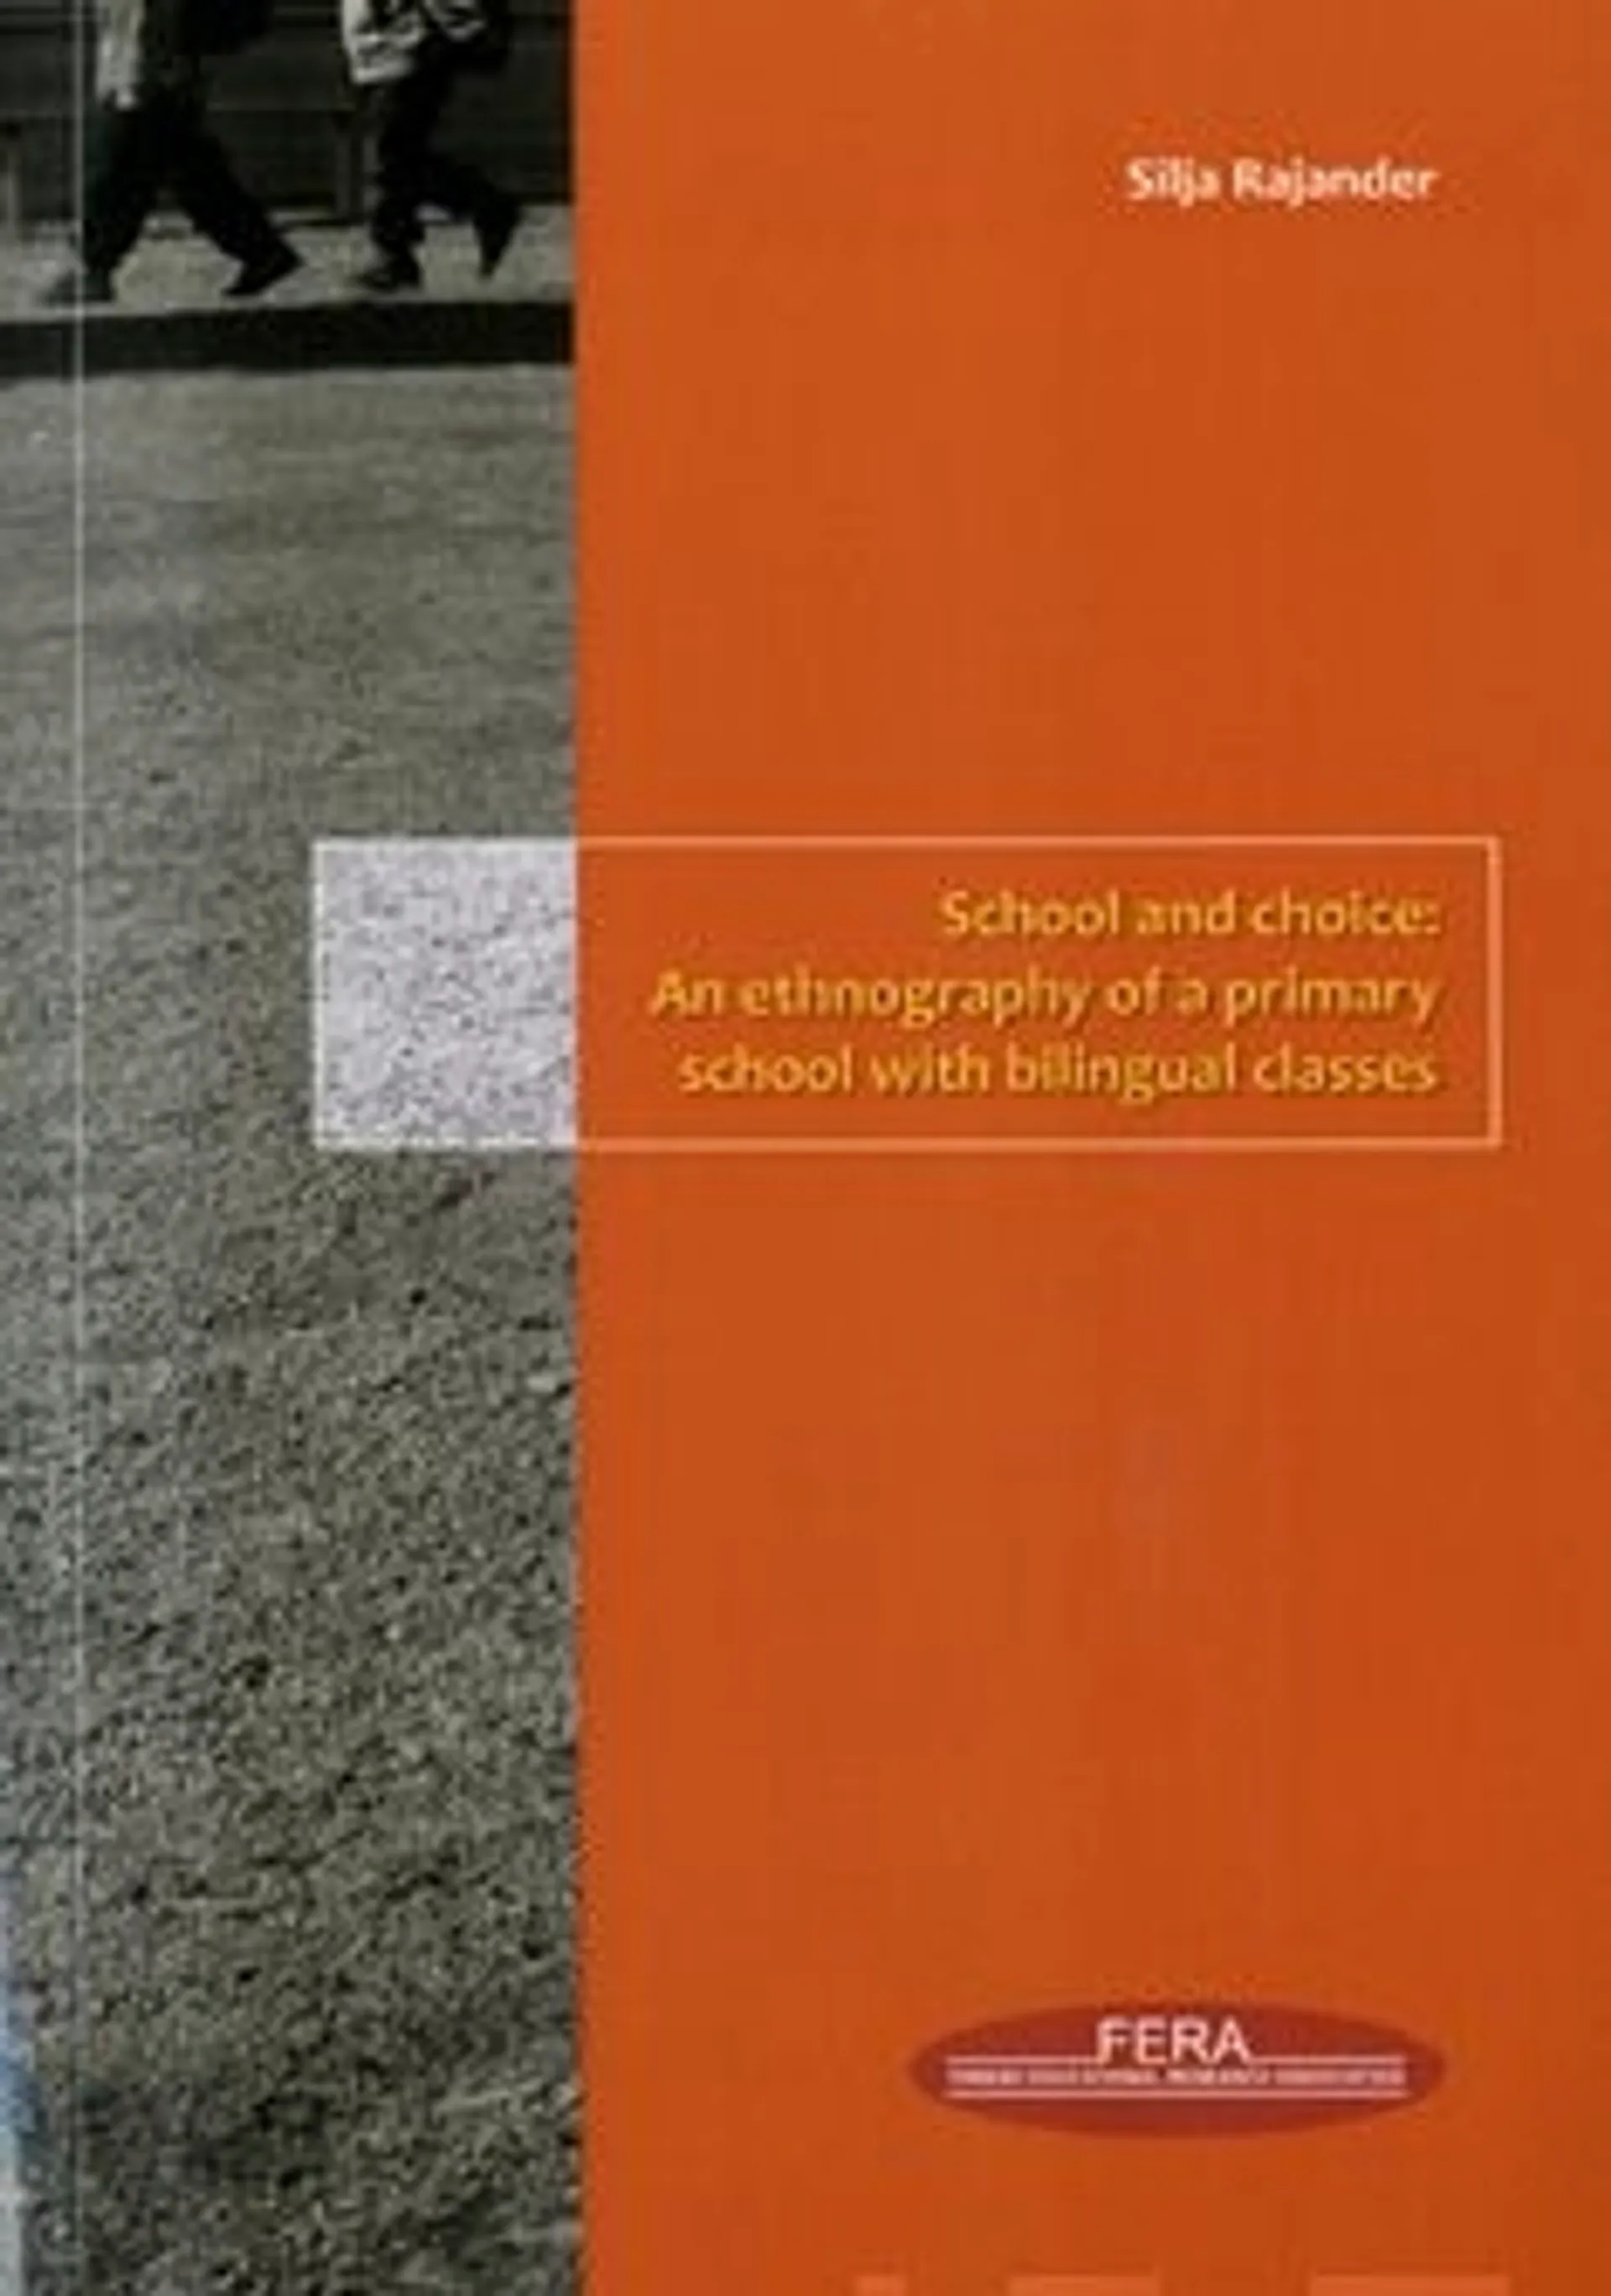 Rajander, School and choice - an ethnography of a primary school with bilingual classes